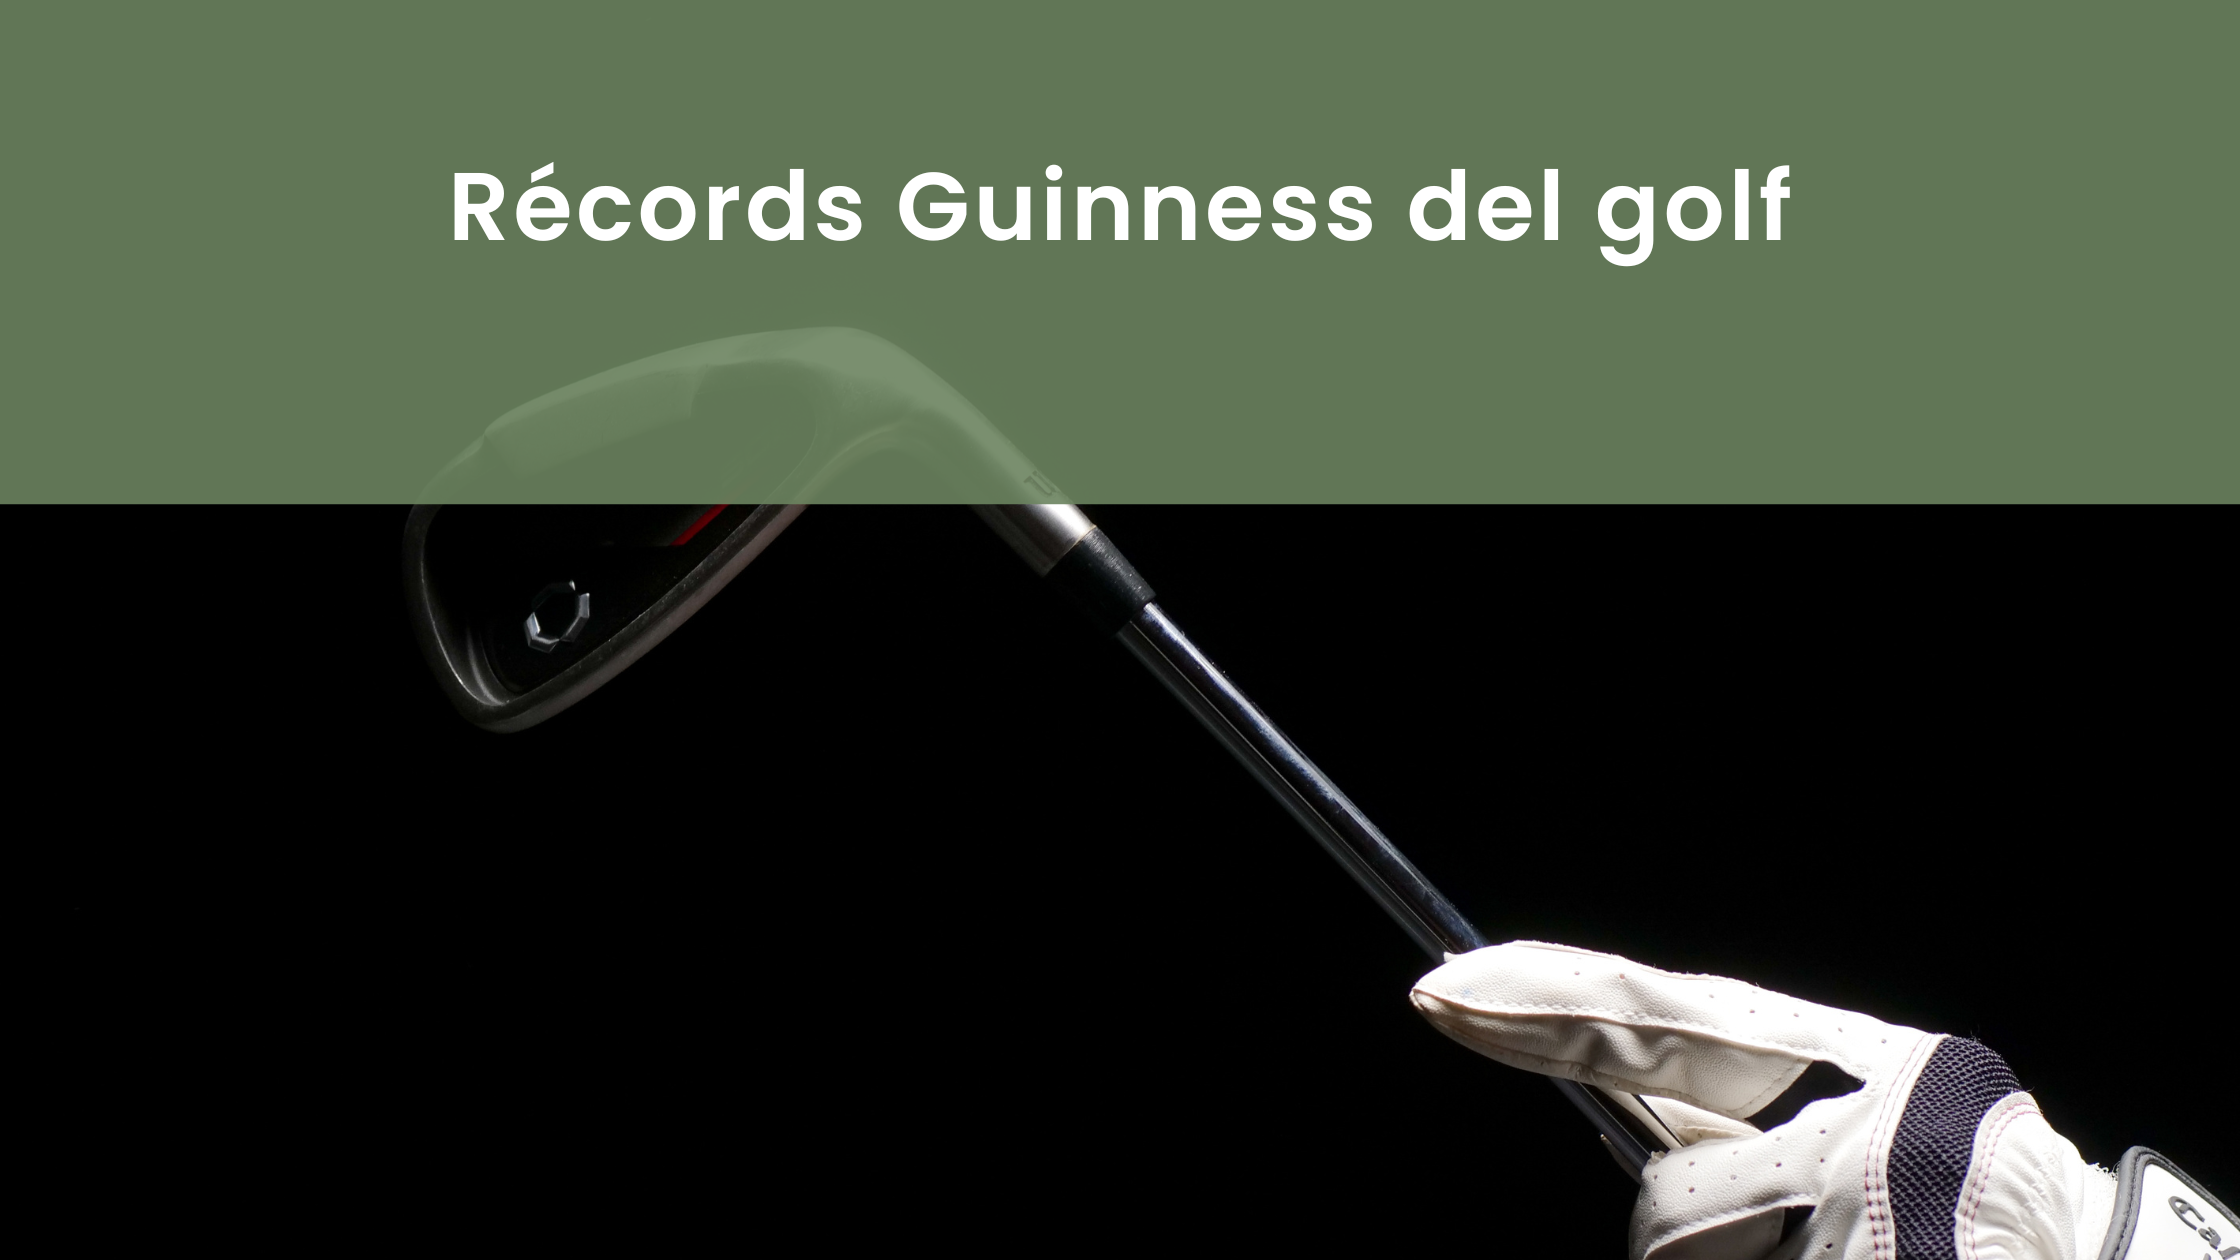 records guinness golf mundiales